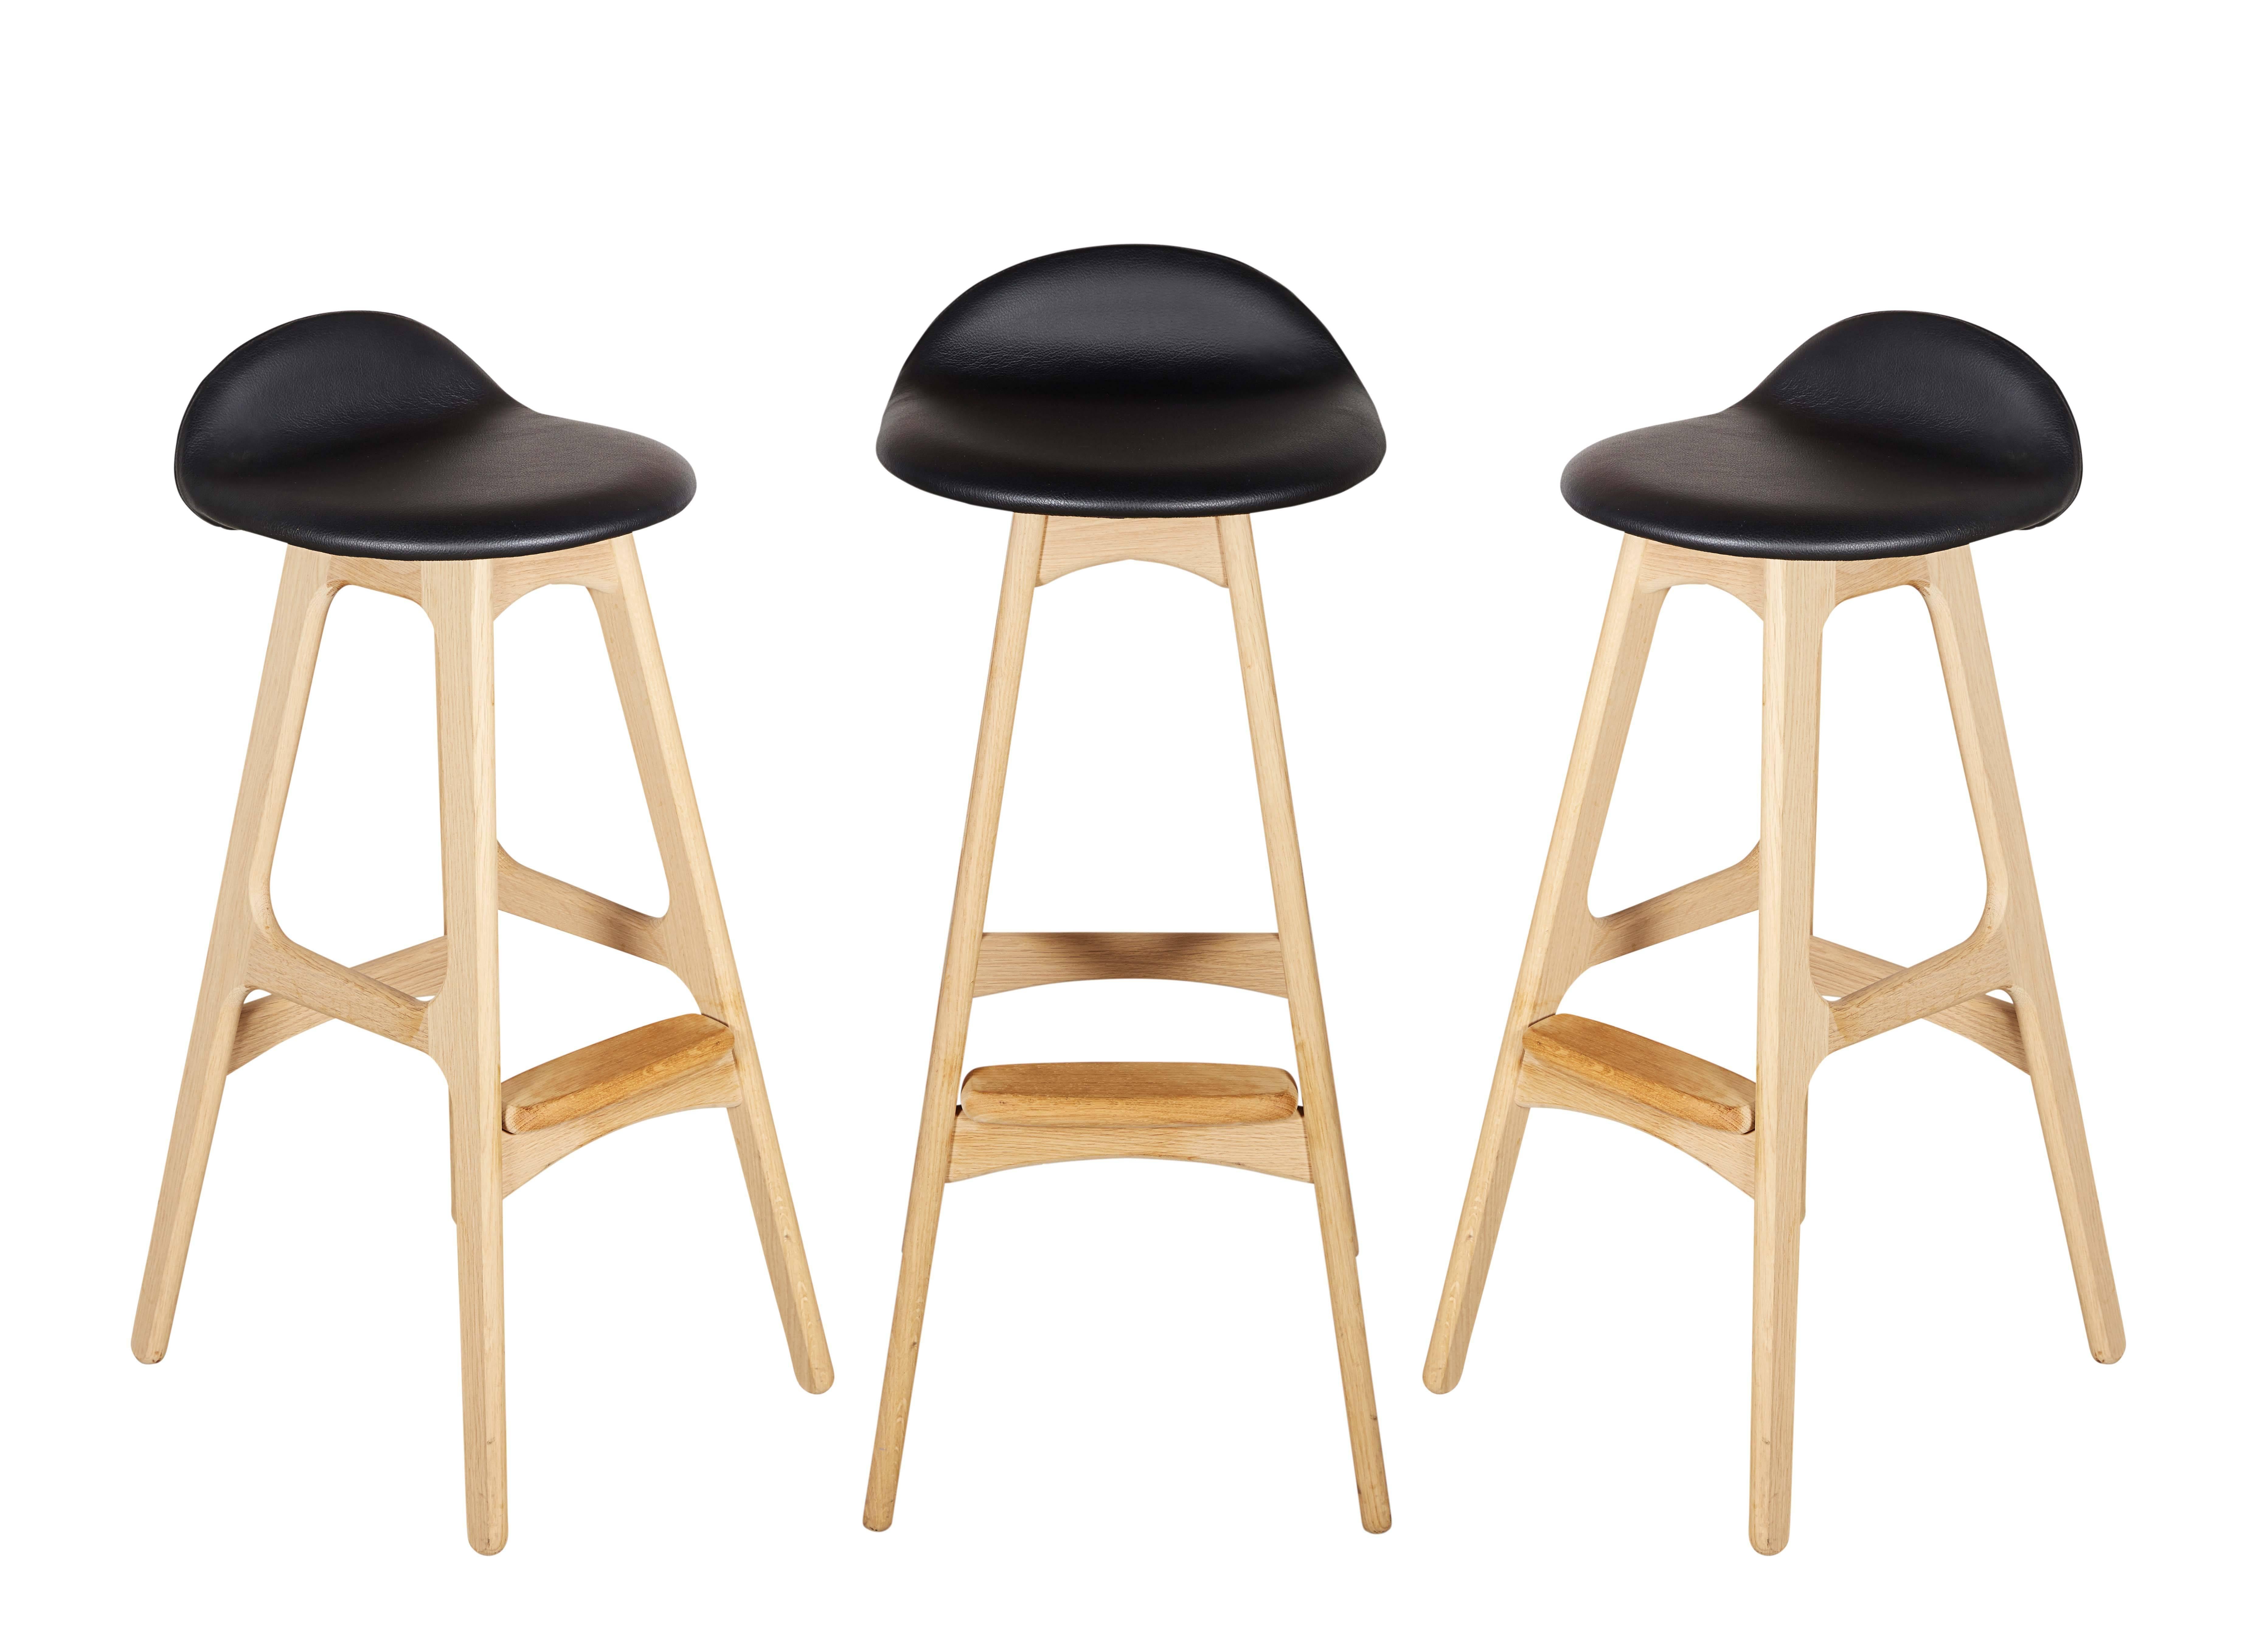 Black Leather Counter Stools by Erik Buch - 6 Stools Available 

This set of oak counter stools are in excellent condition, and have been newly upholstered in a beautiful Italian black leather. The back is surprisingly supportive so sit up straight